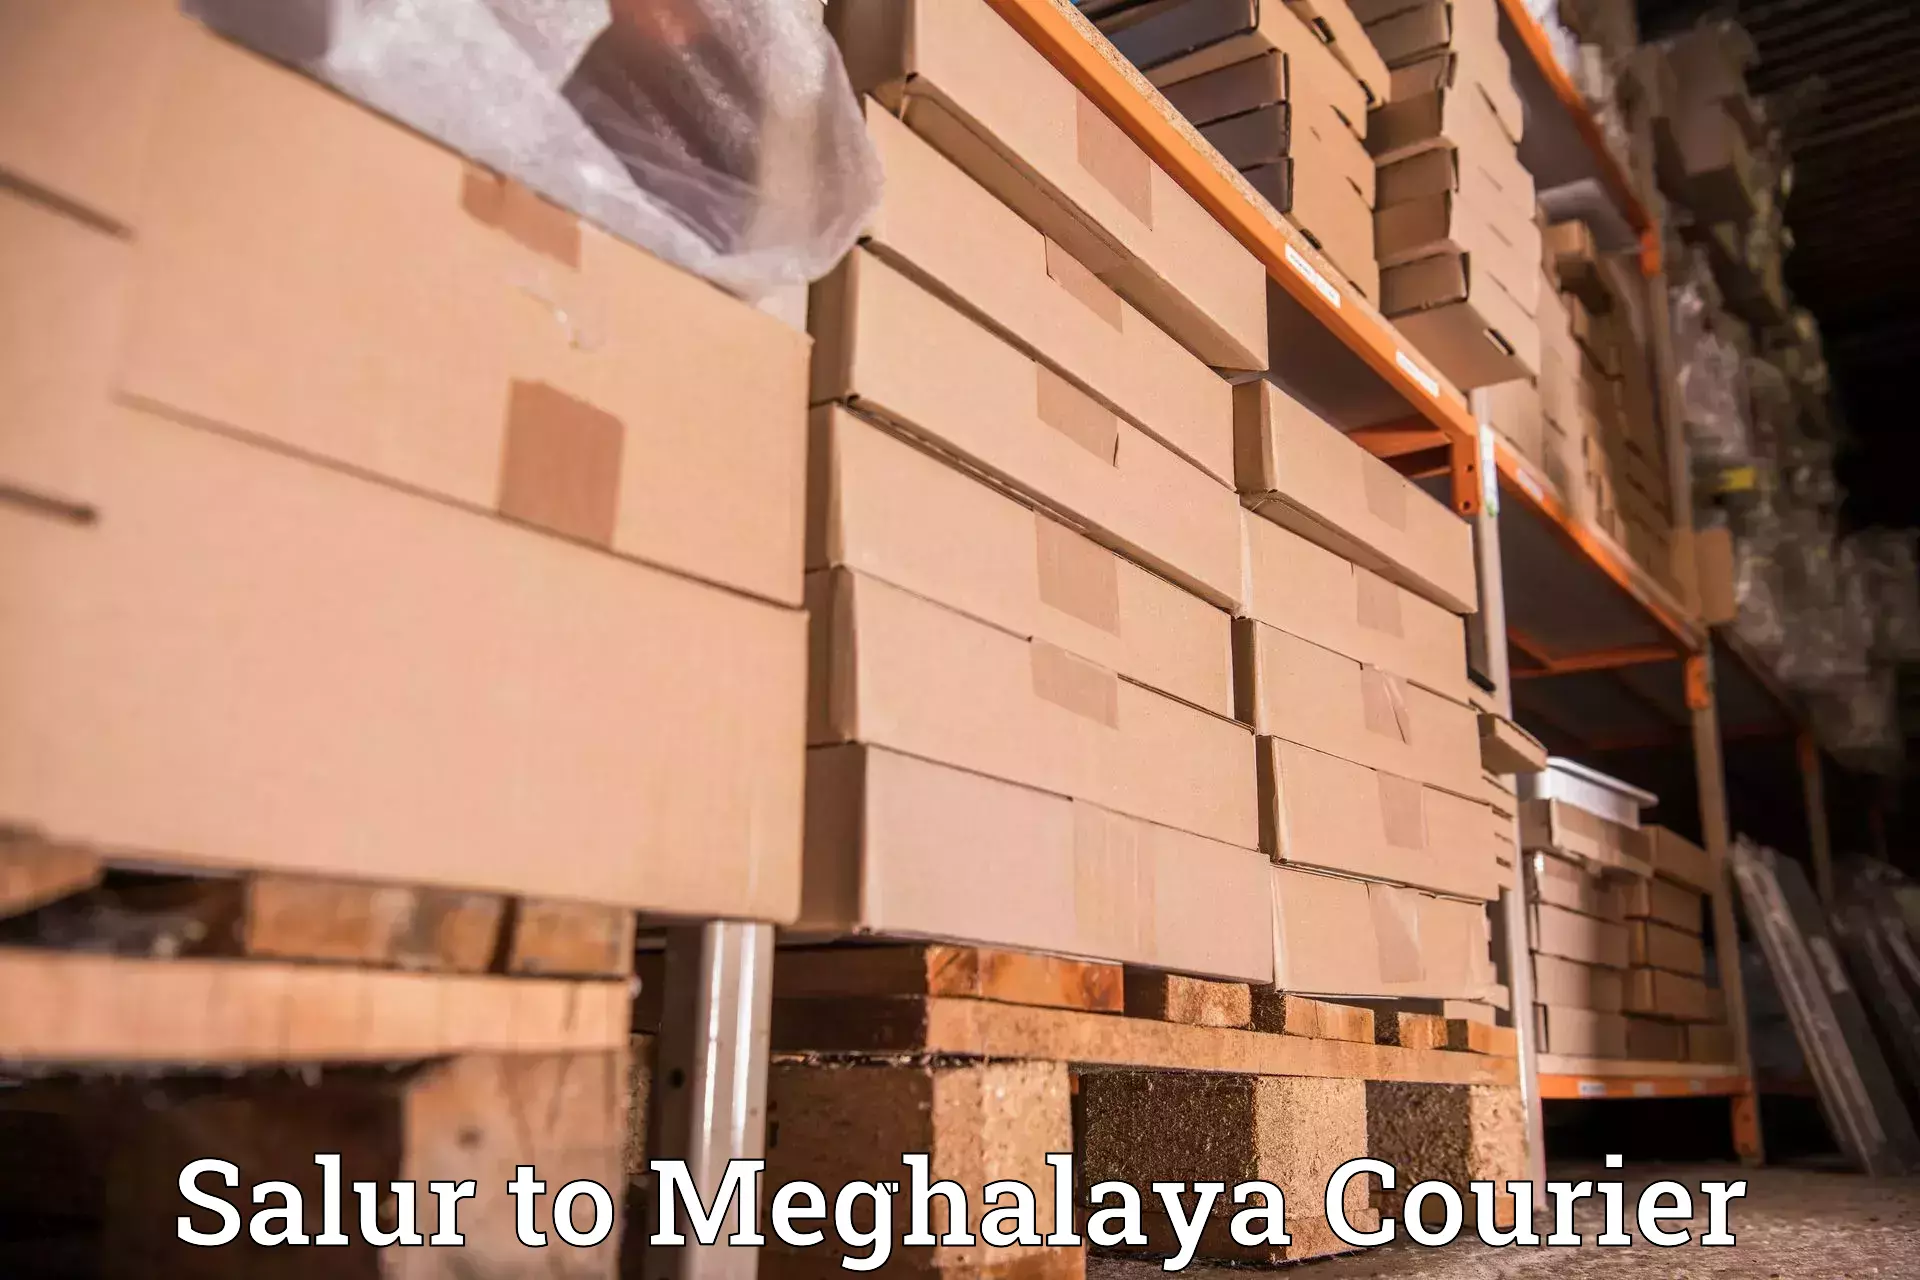 Easy access courier services in Salur to Meghalaya